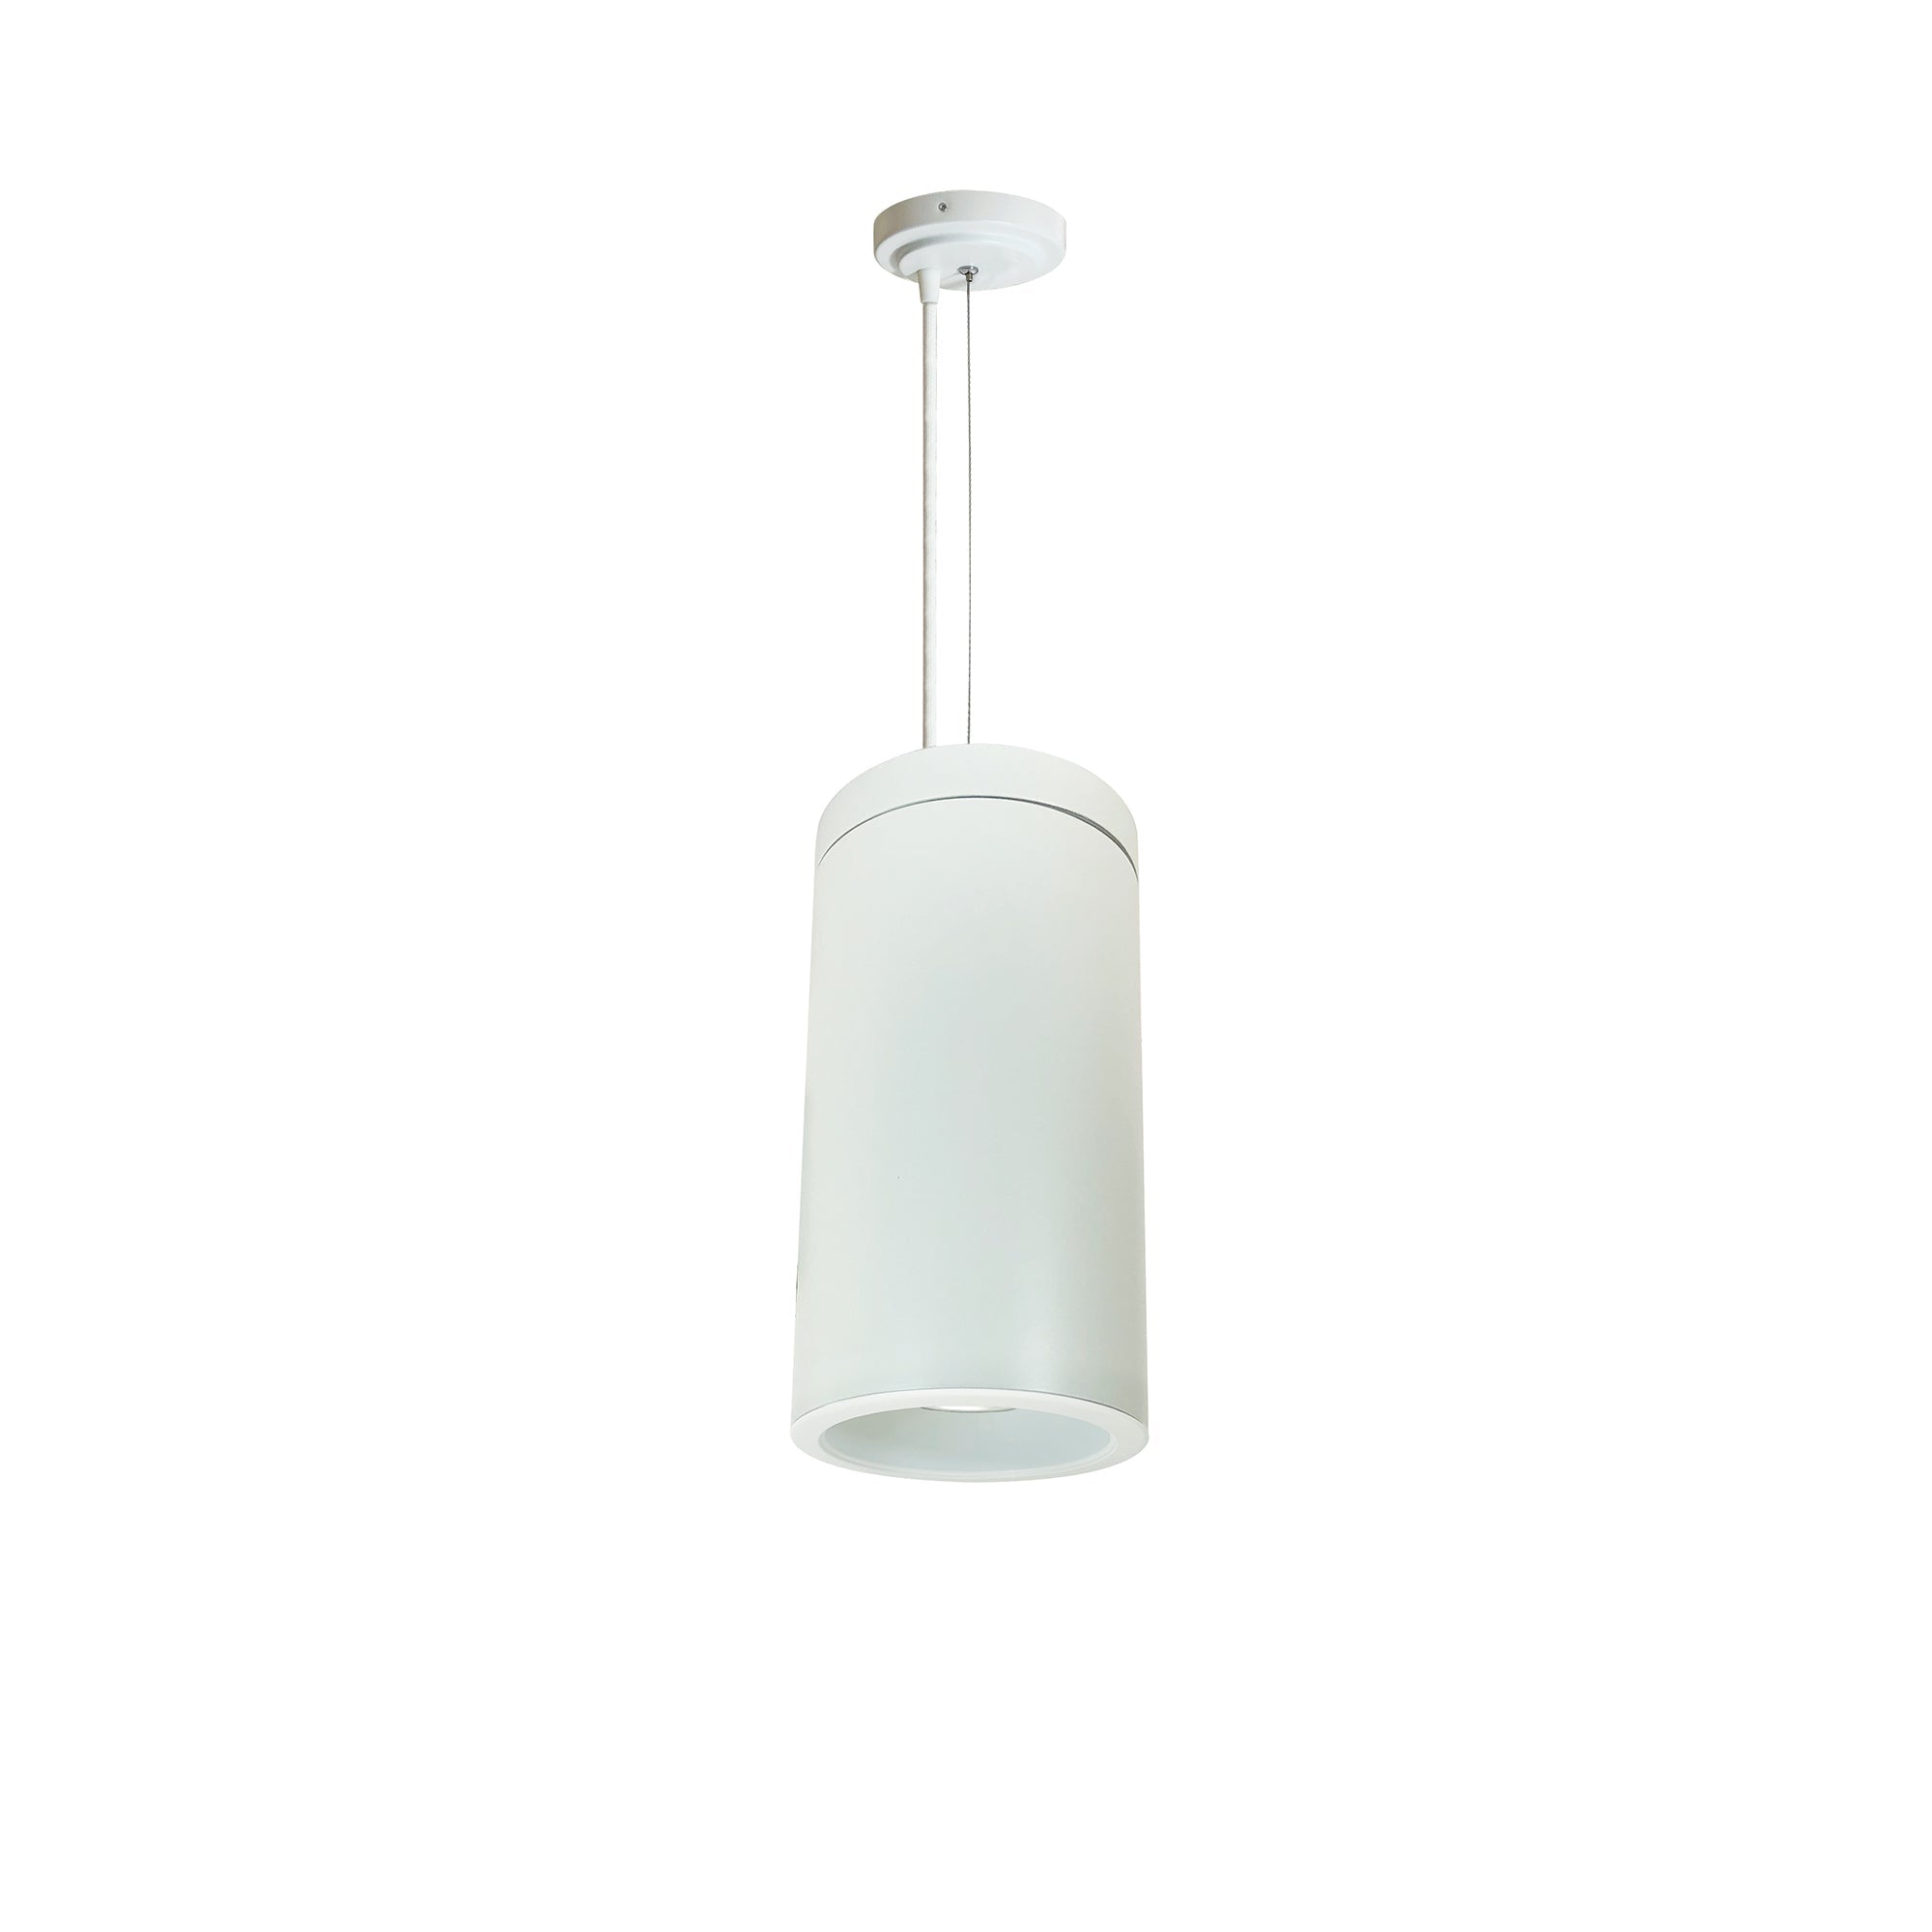 Nora Lighting NYLD2-6C075135WWWAC - Cylinder - 6 Inch Cylinder, White, Cable mount, Cobalt refl., 750L, 35K, White